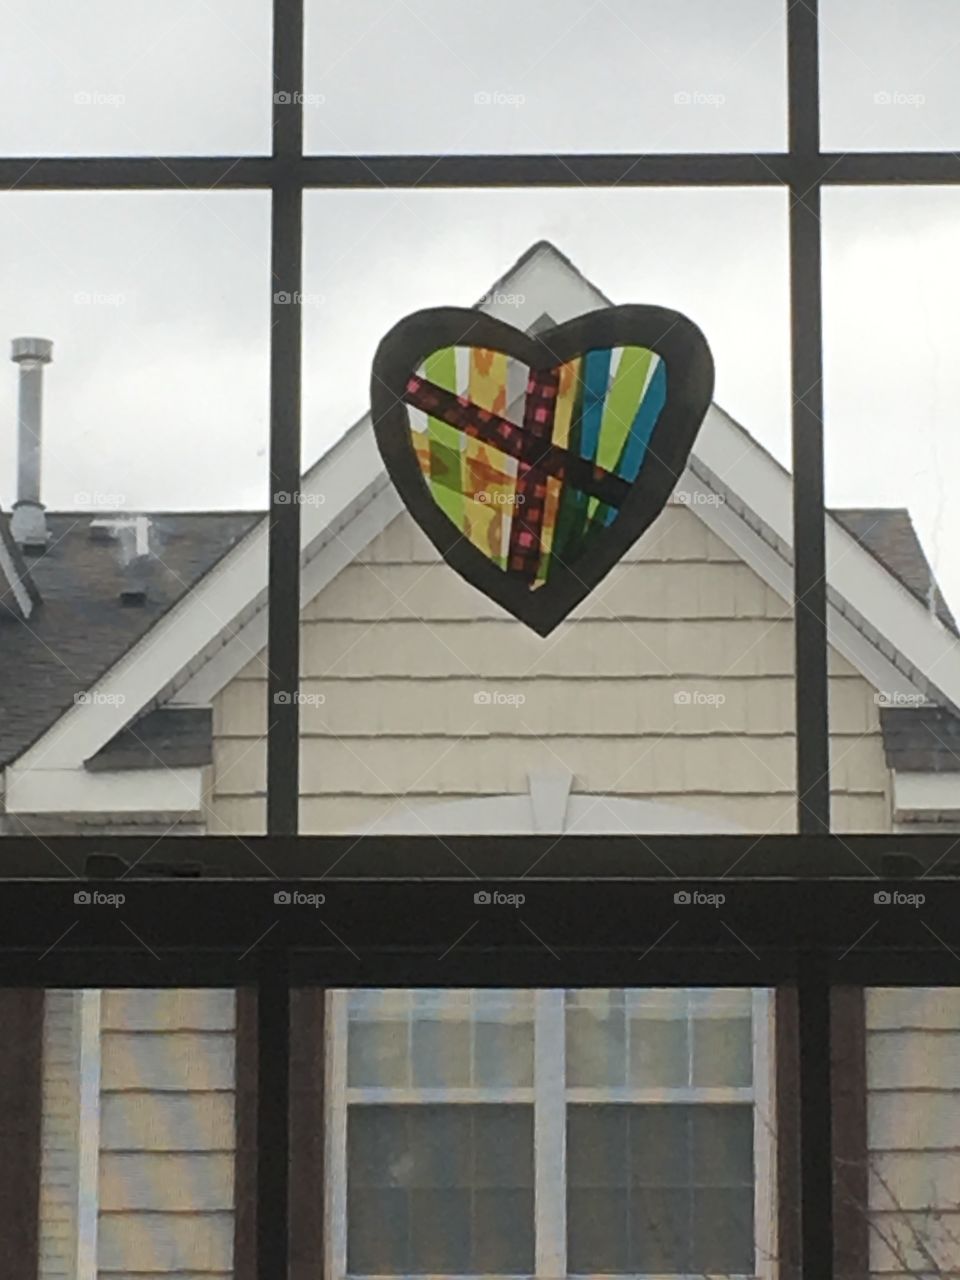 Home is where the heart is. Child's heart artwork hung in window. Peaked roof of house seen through window. 